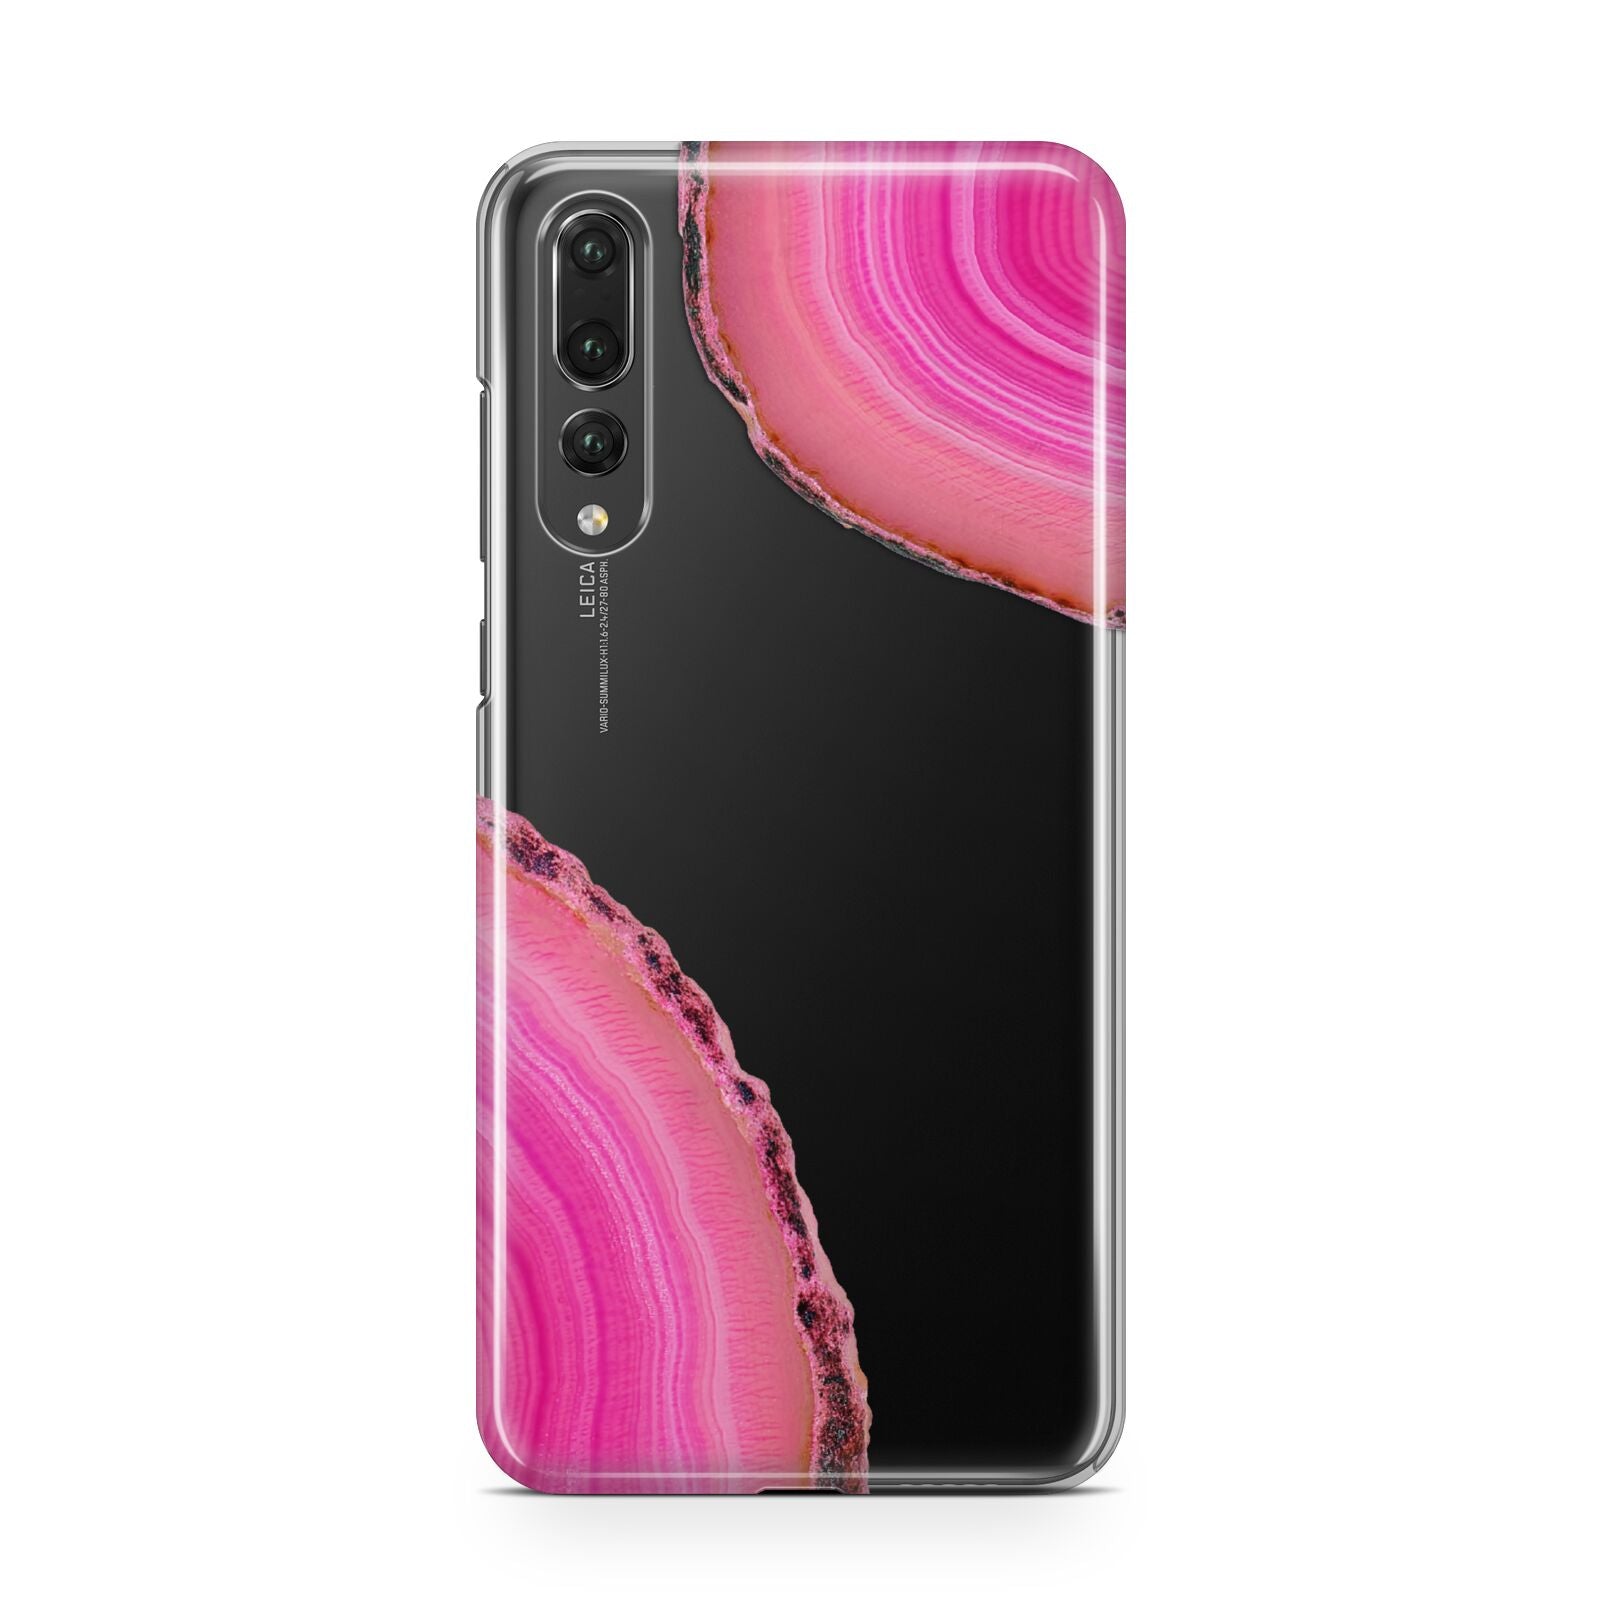 Agate Bright Pink Huawei P20 Pro Phone Case